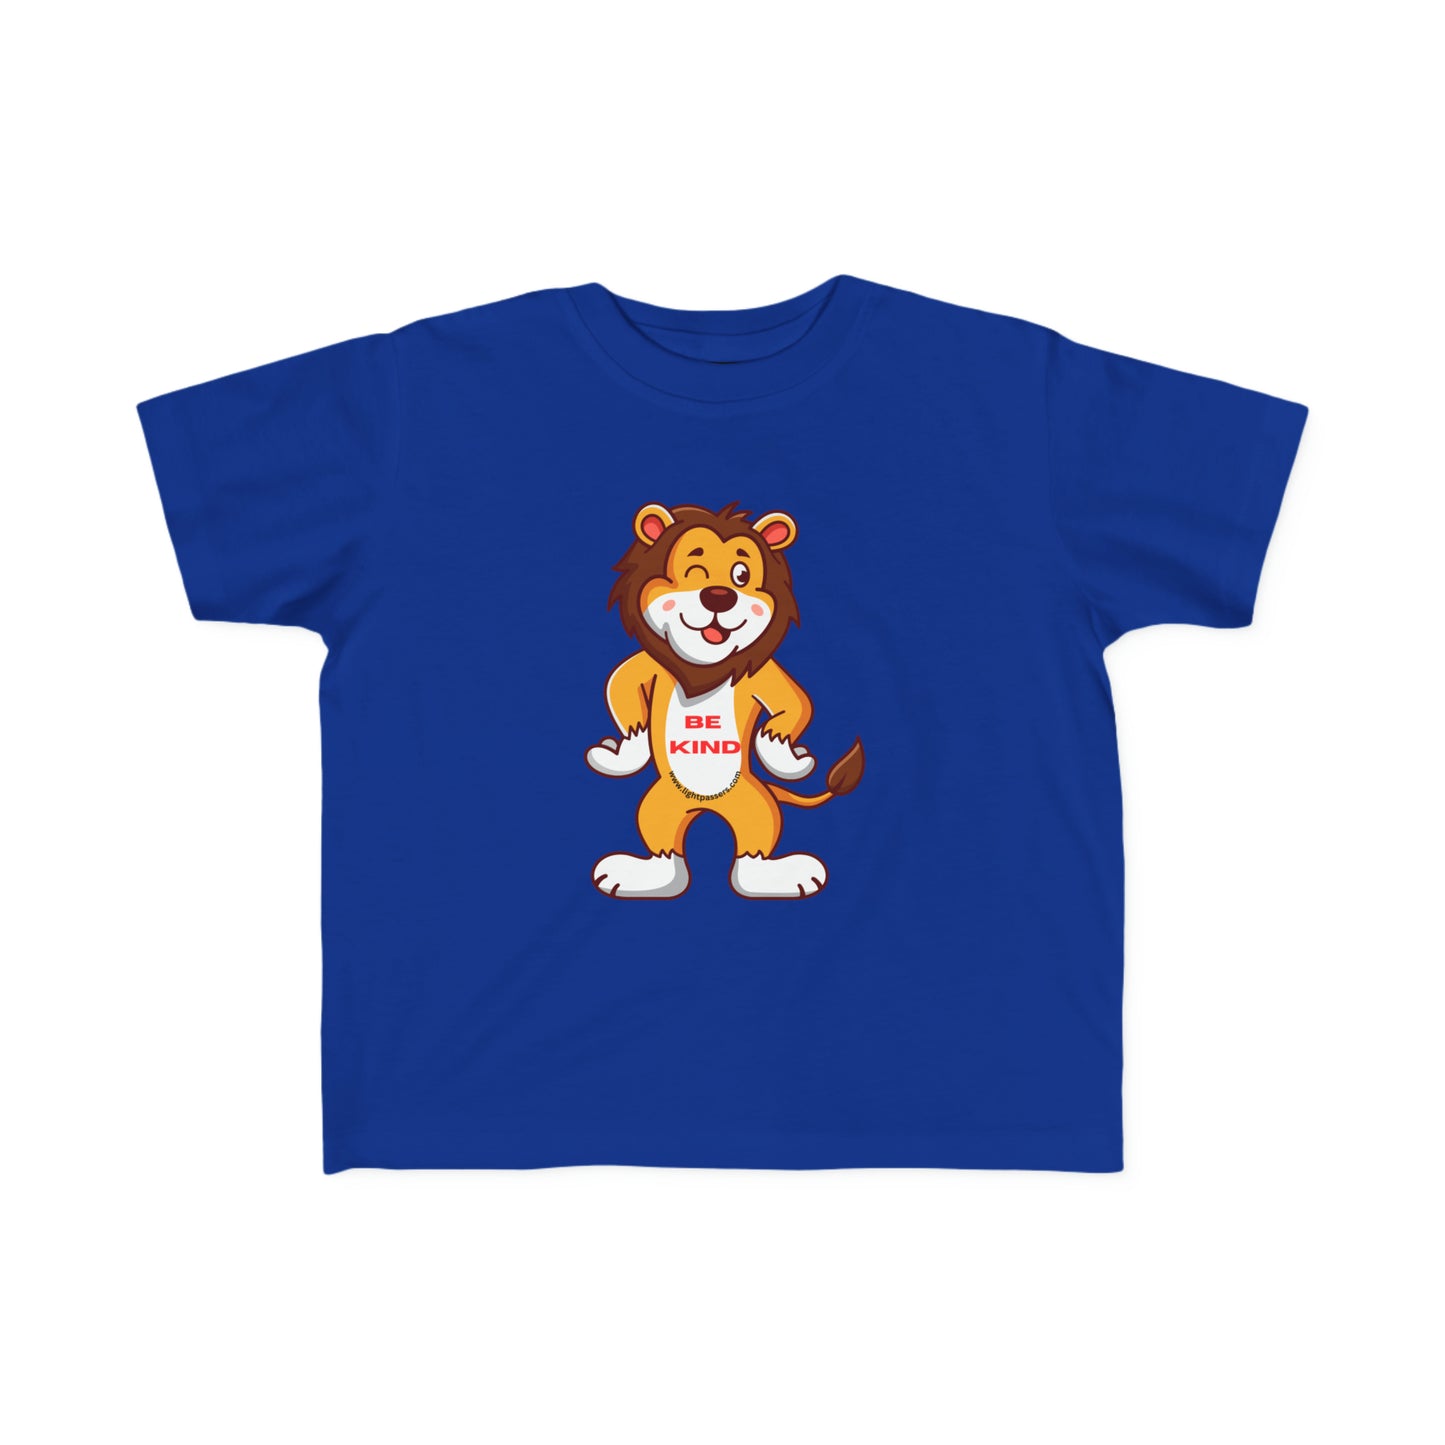 A toddler's tee featuring a cartoon lion design, soft 100% combed cotton, durable print, and tear-away label. Perfect for sensitive skin and first adventures.